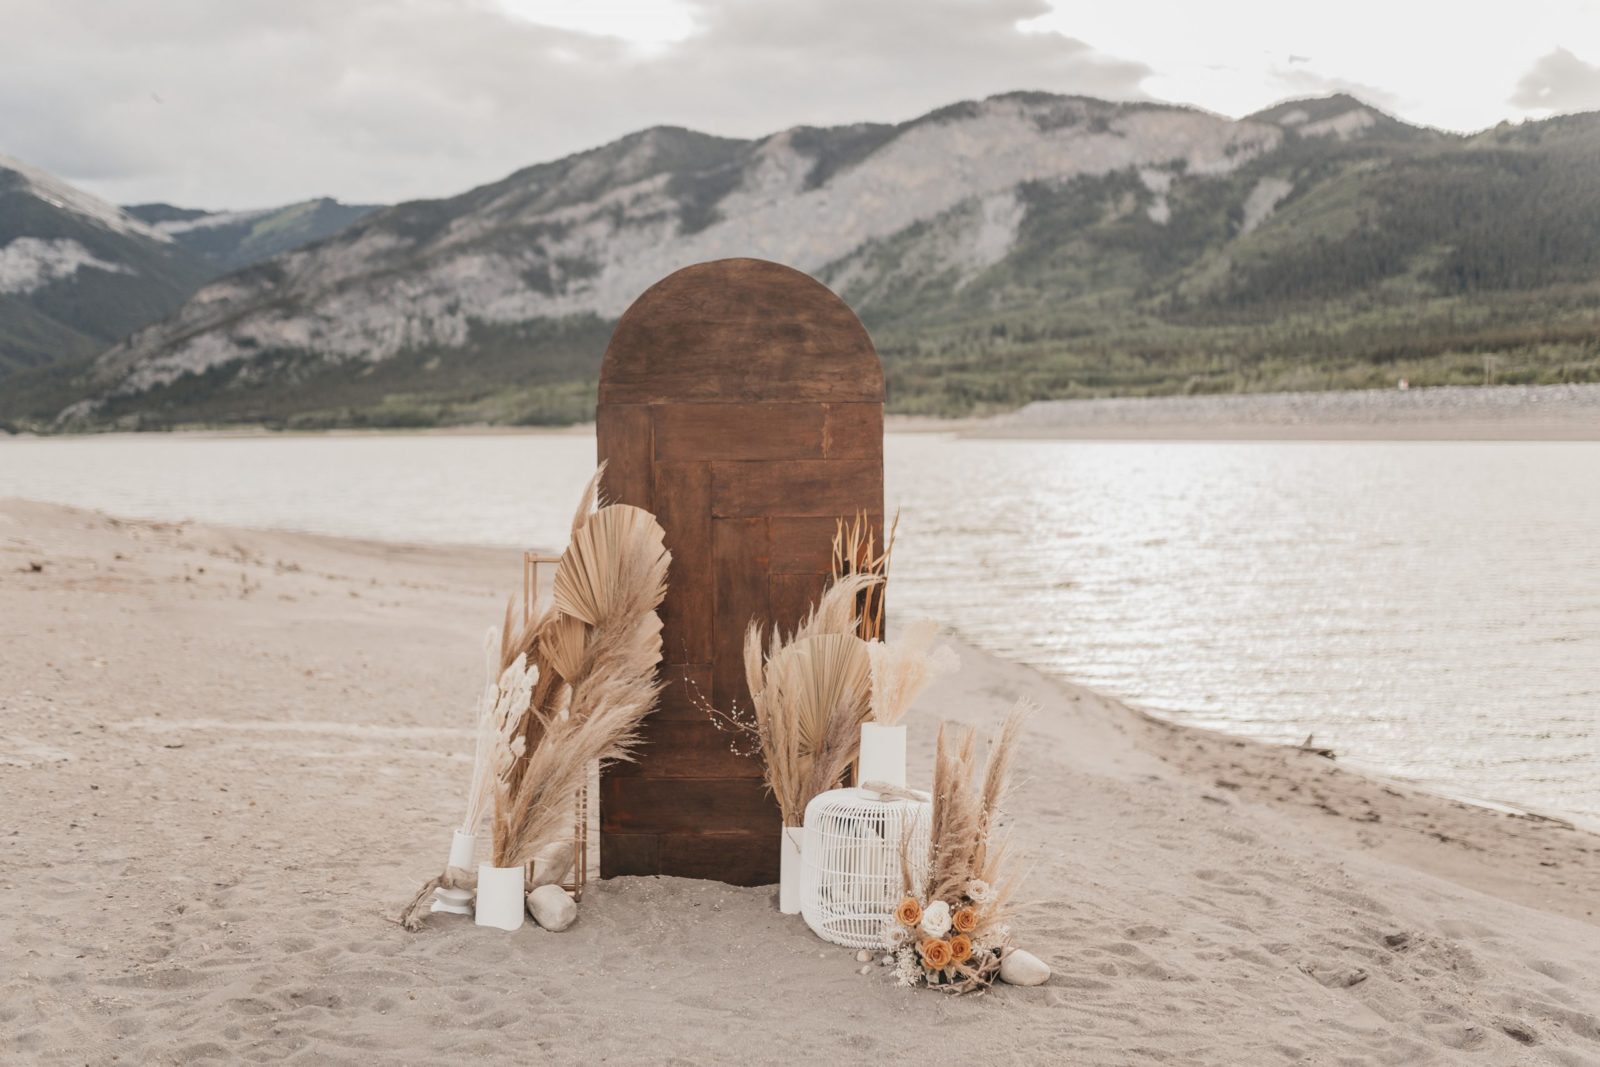 10 beautiful ceremony arch ideas to inspire your mountain wedding or elopement!